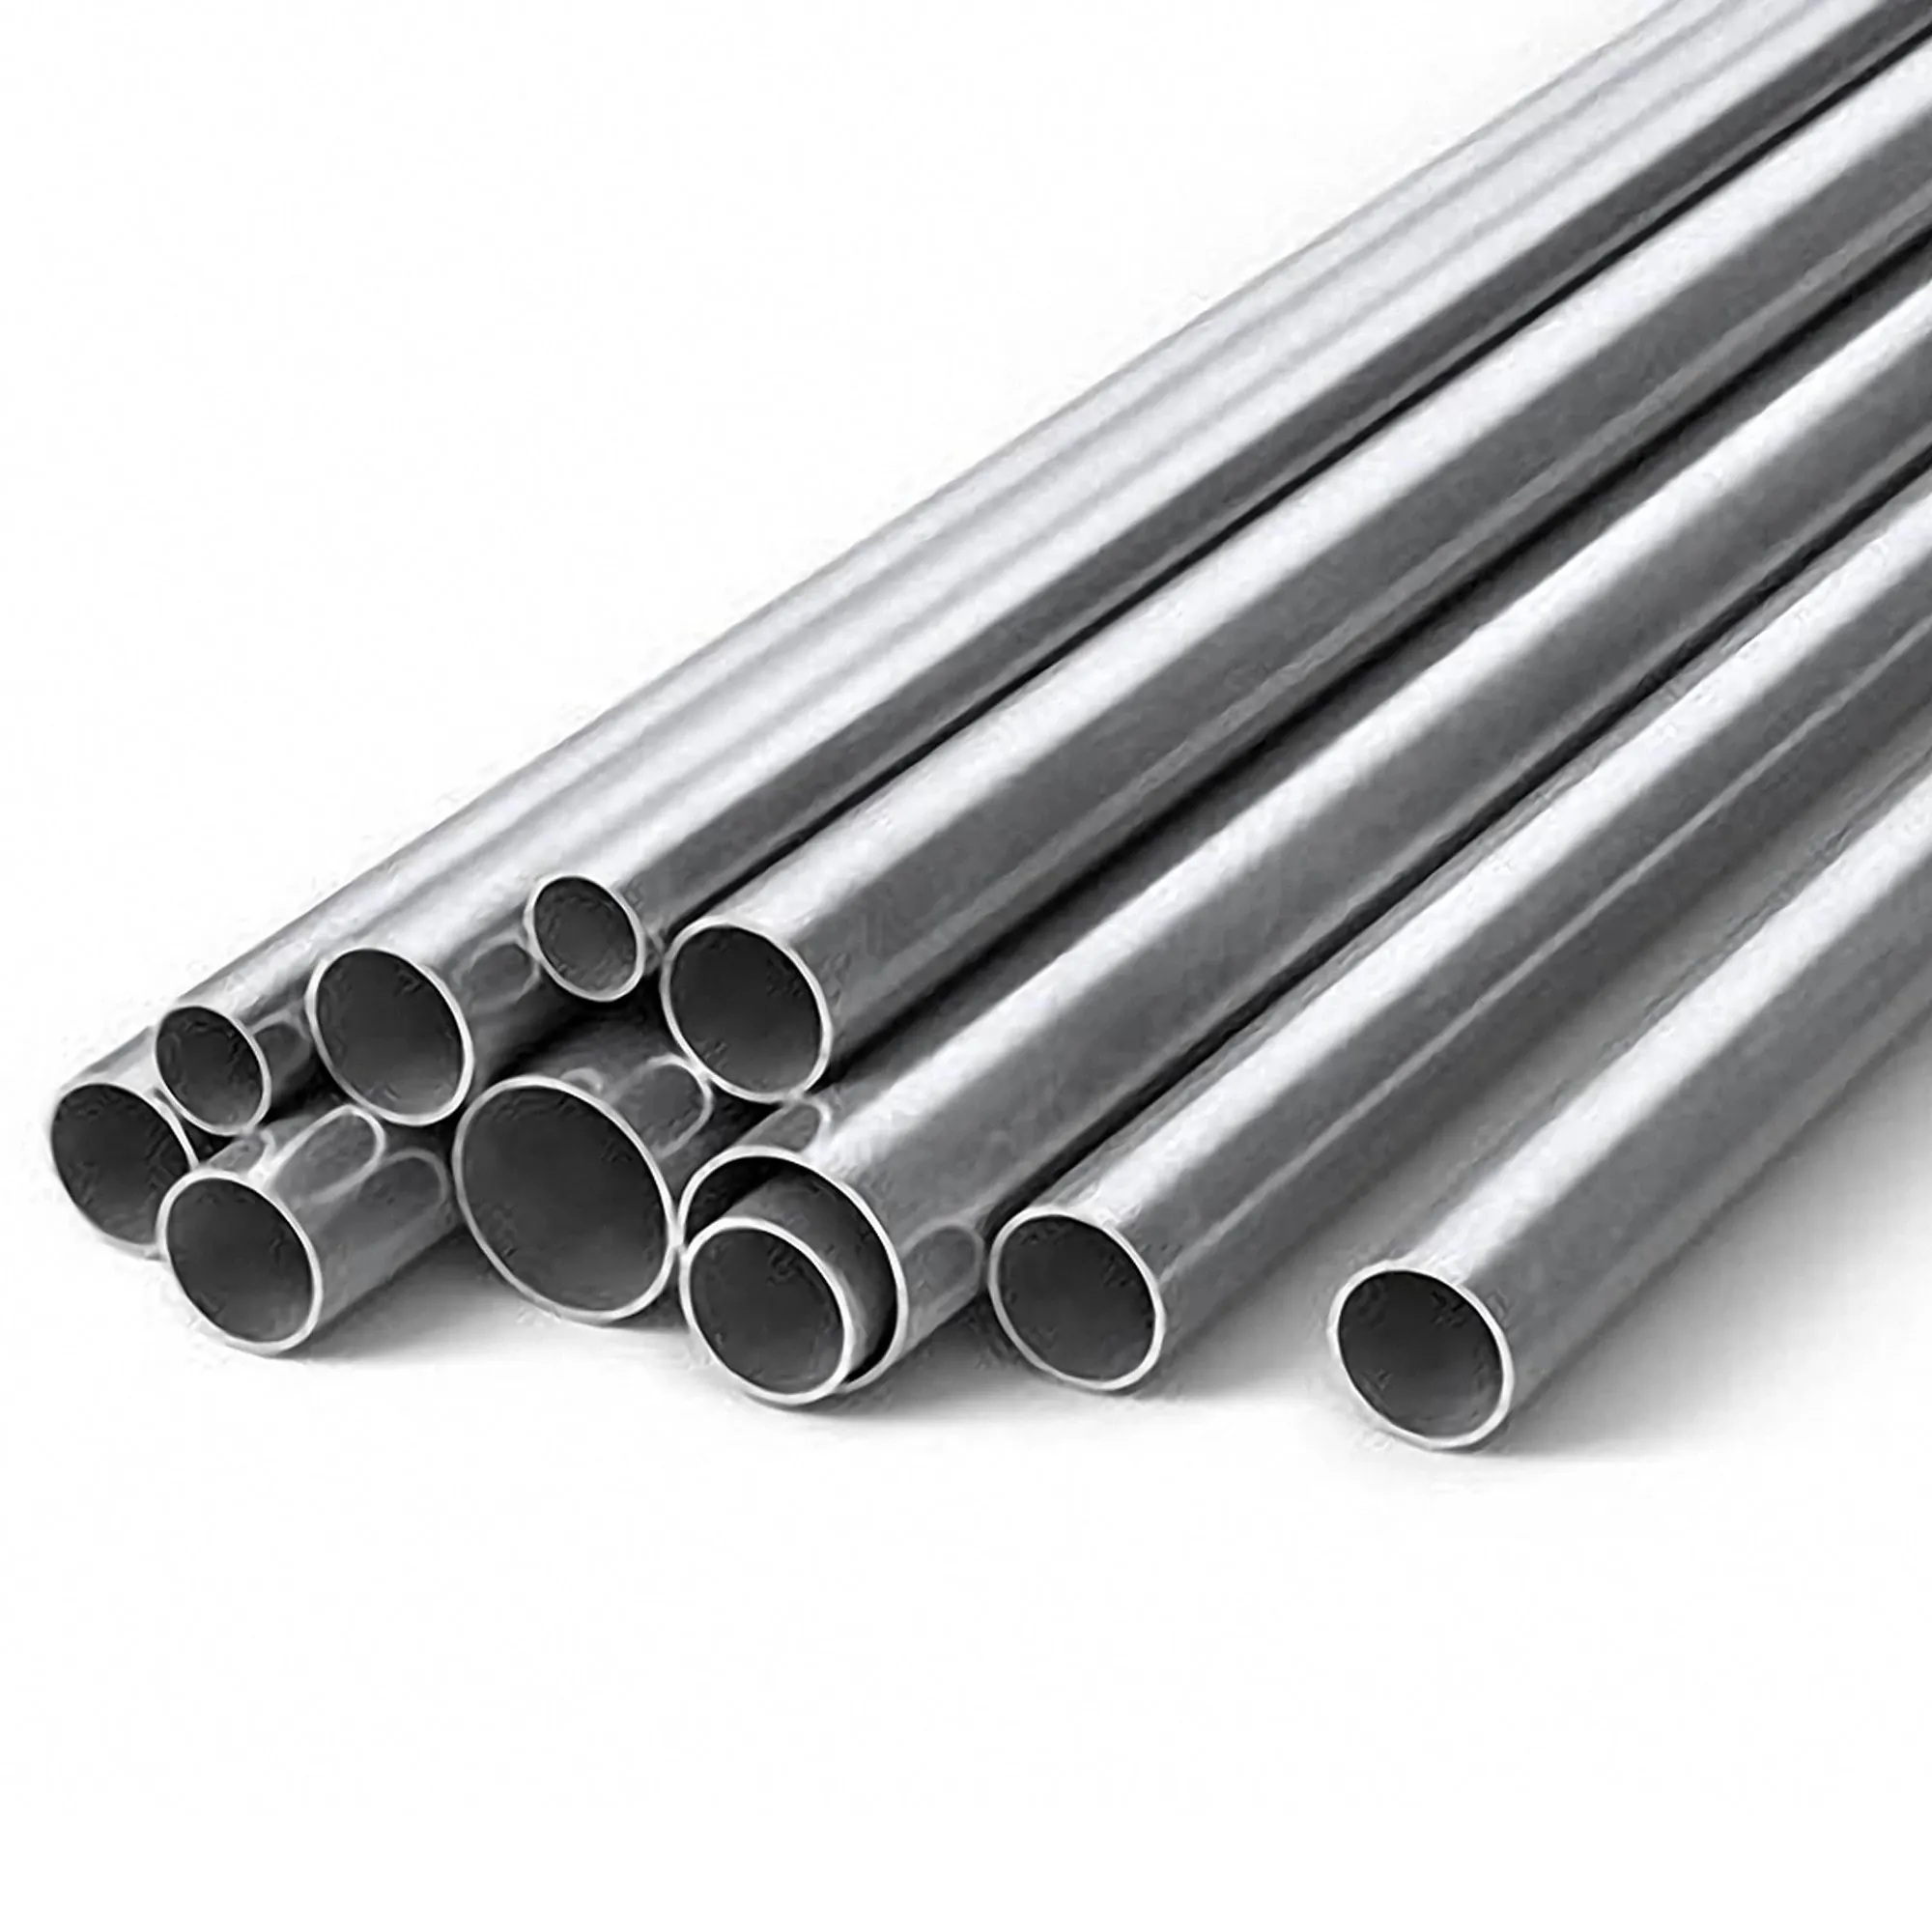 ASTM 16mo3 Hot sale good quality 2 inch 8inch 304 stainless steel seamless pipe inox ROUND tube